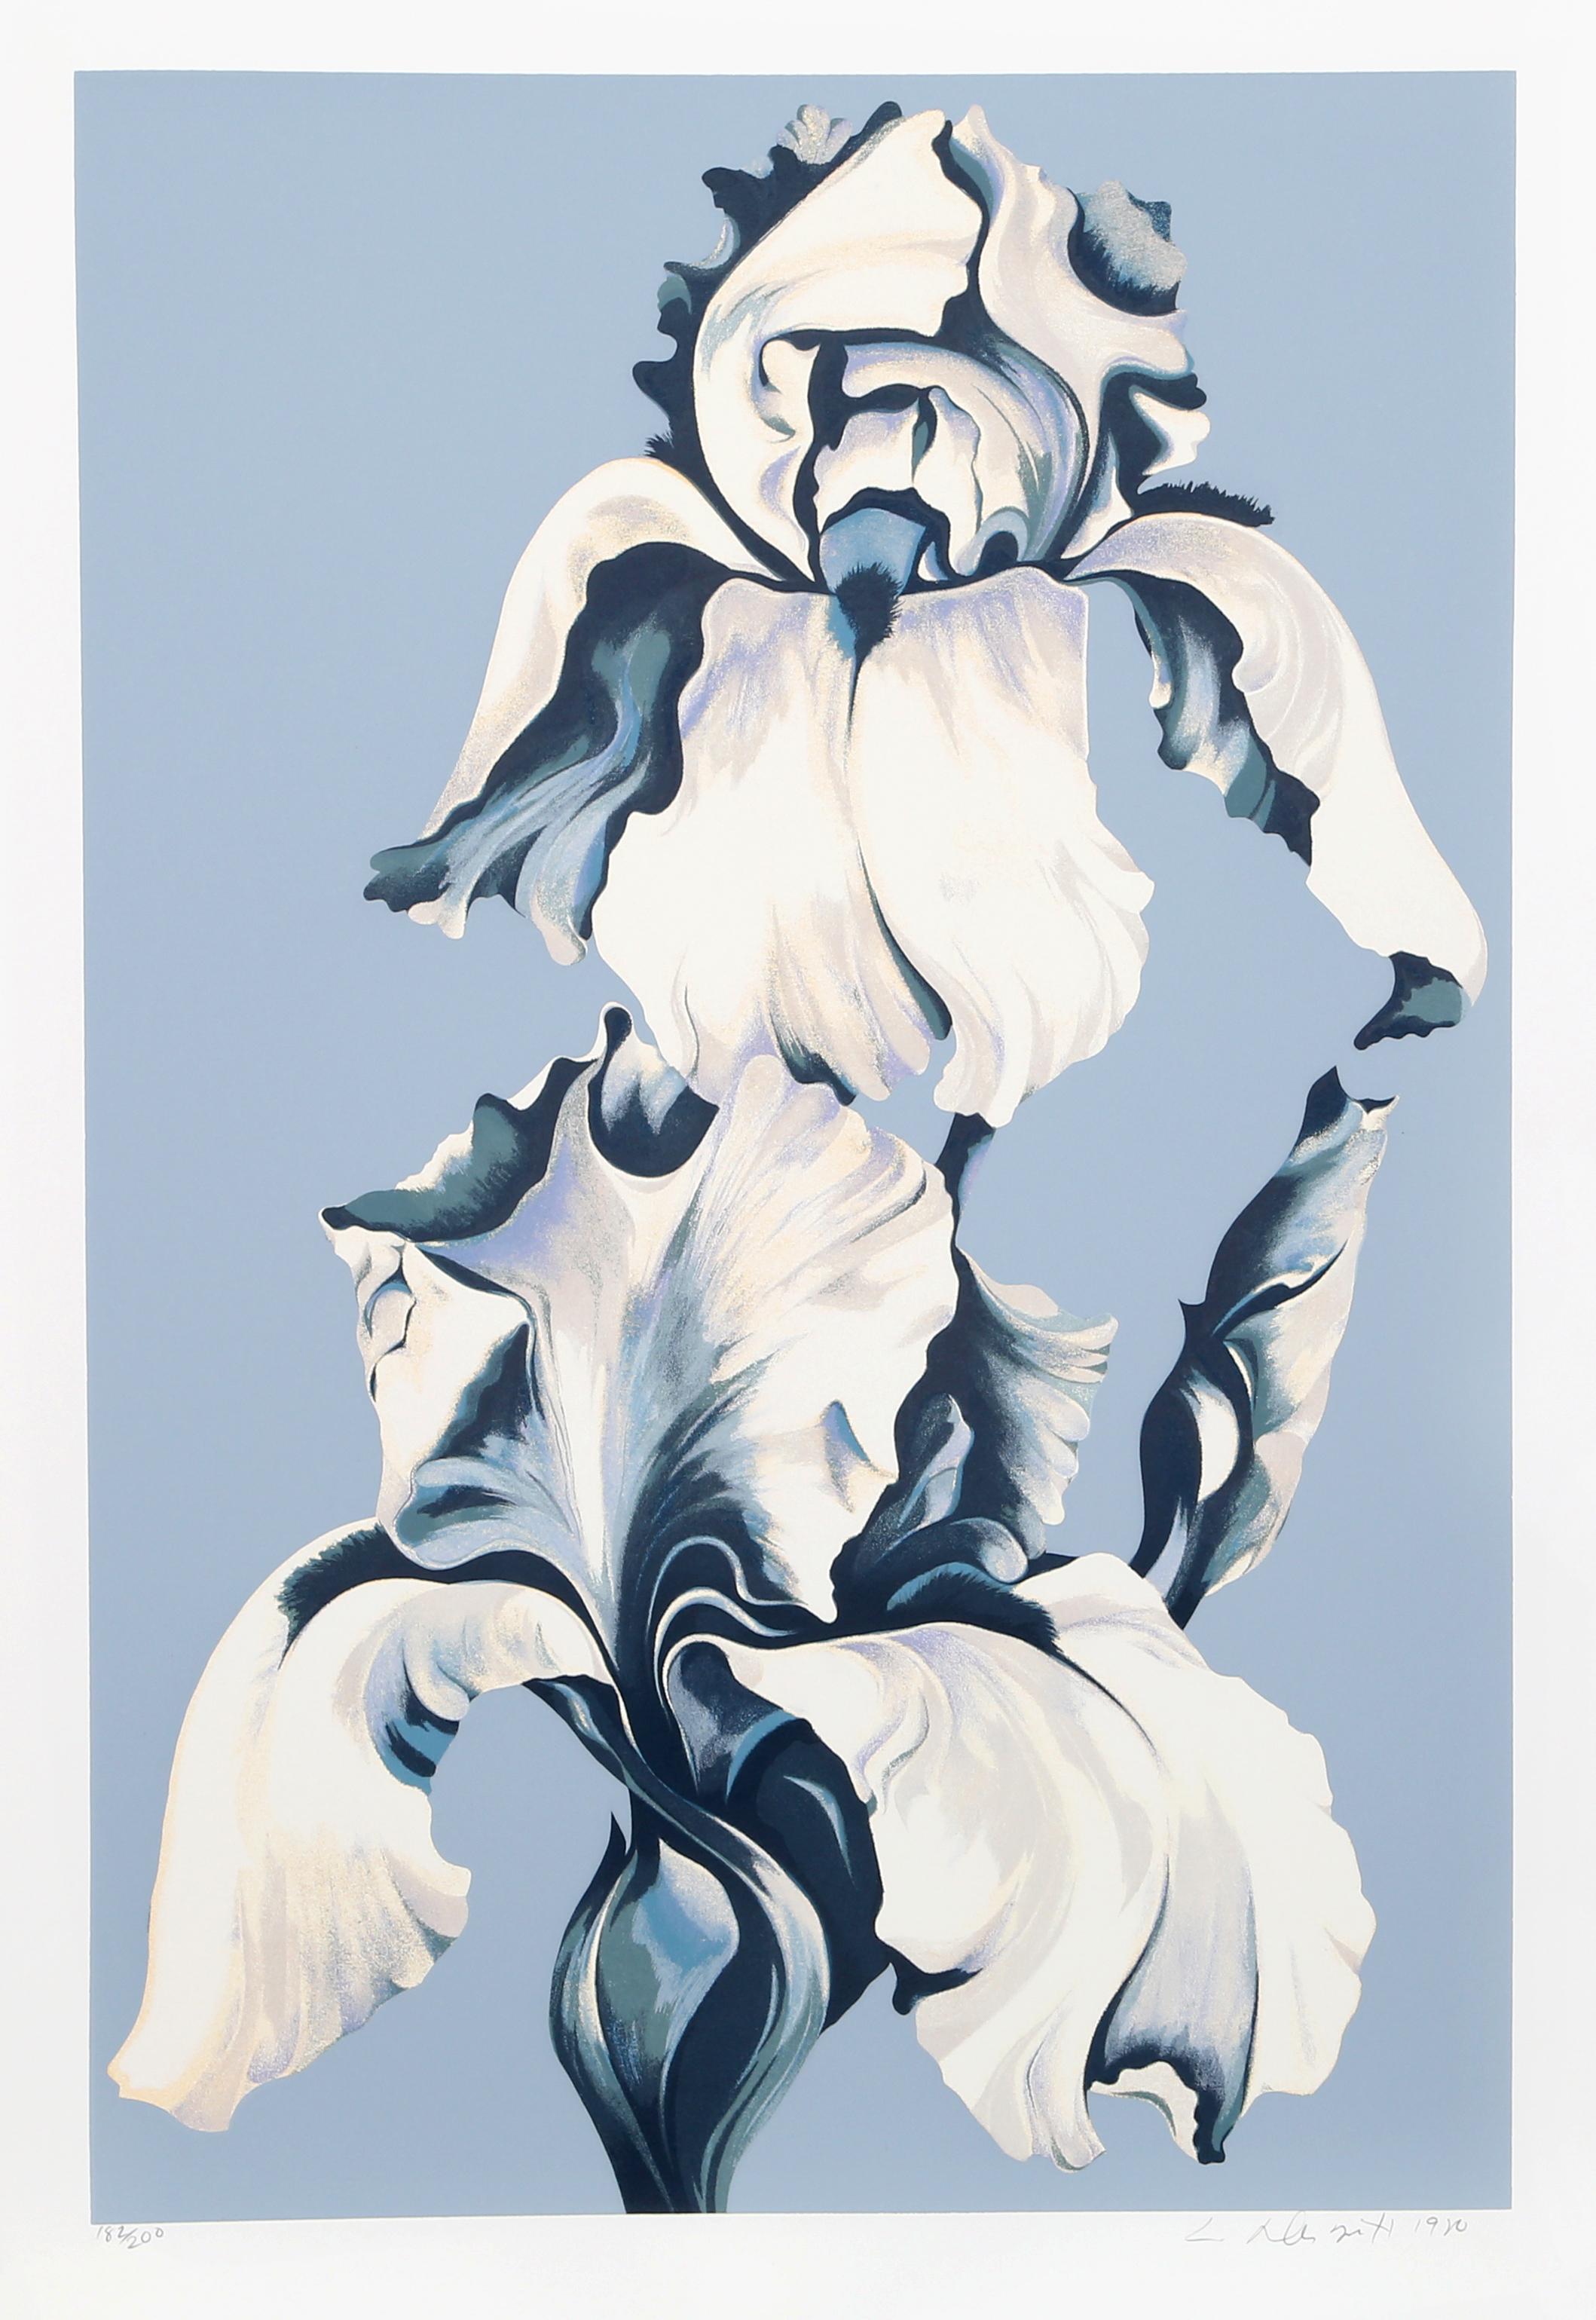 Artist: Lowell Blair Nesbitt, American (1933 - 1993)
Title: White Irises on Blue
Year: 1980
Medium: Serigraph, signed and numbered in pencil
Edition: 200
Image Size: 41 x 23 inches
Size: 45 x 29 in. (114.3 x 73.66 cm)